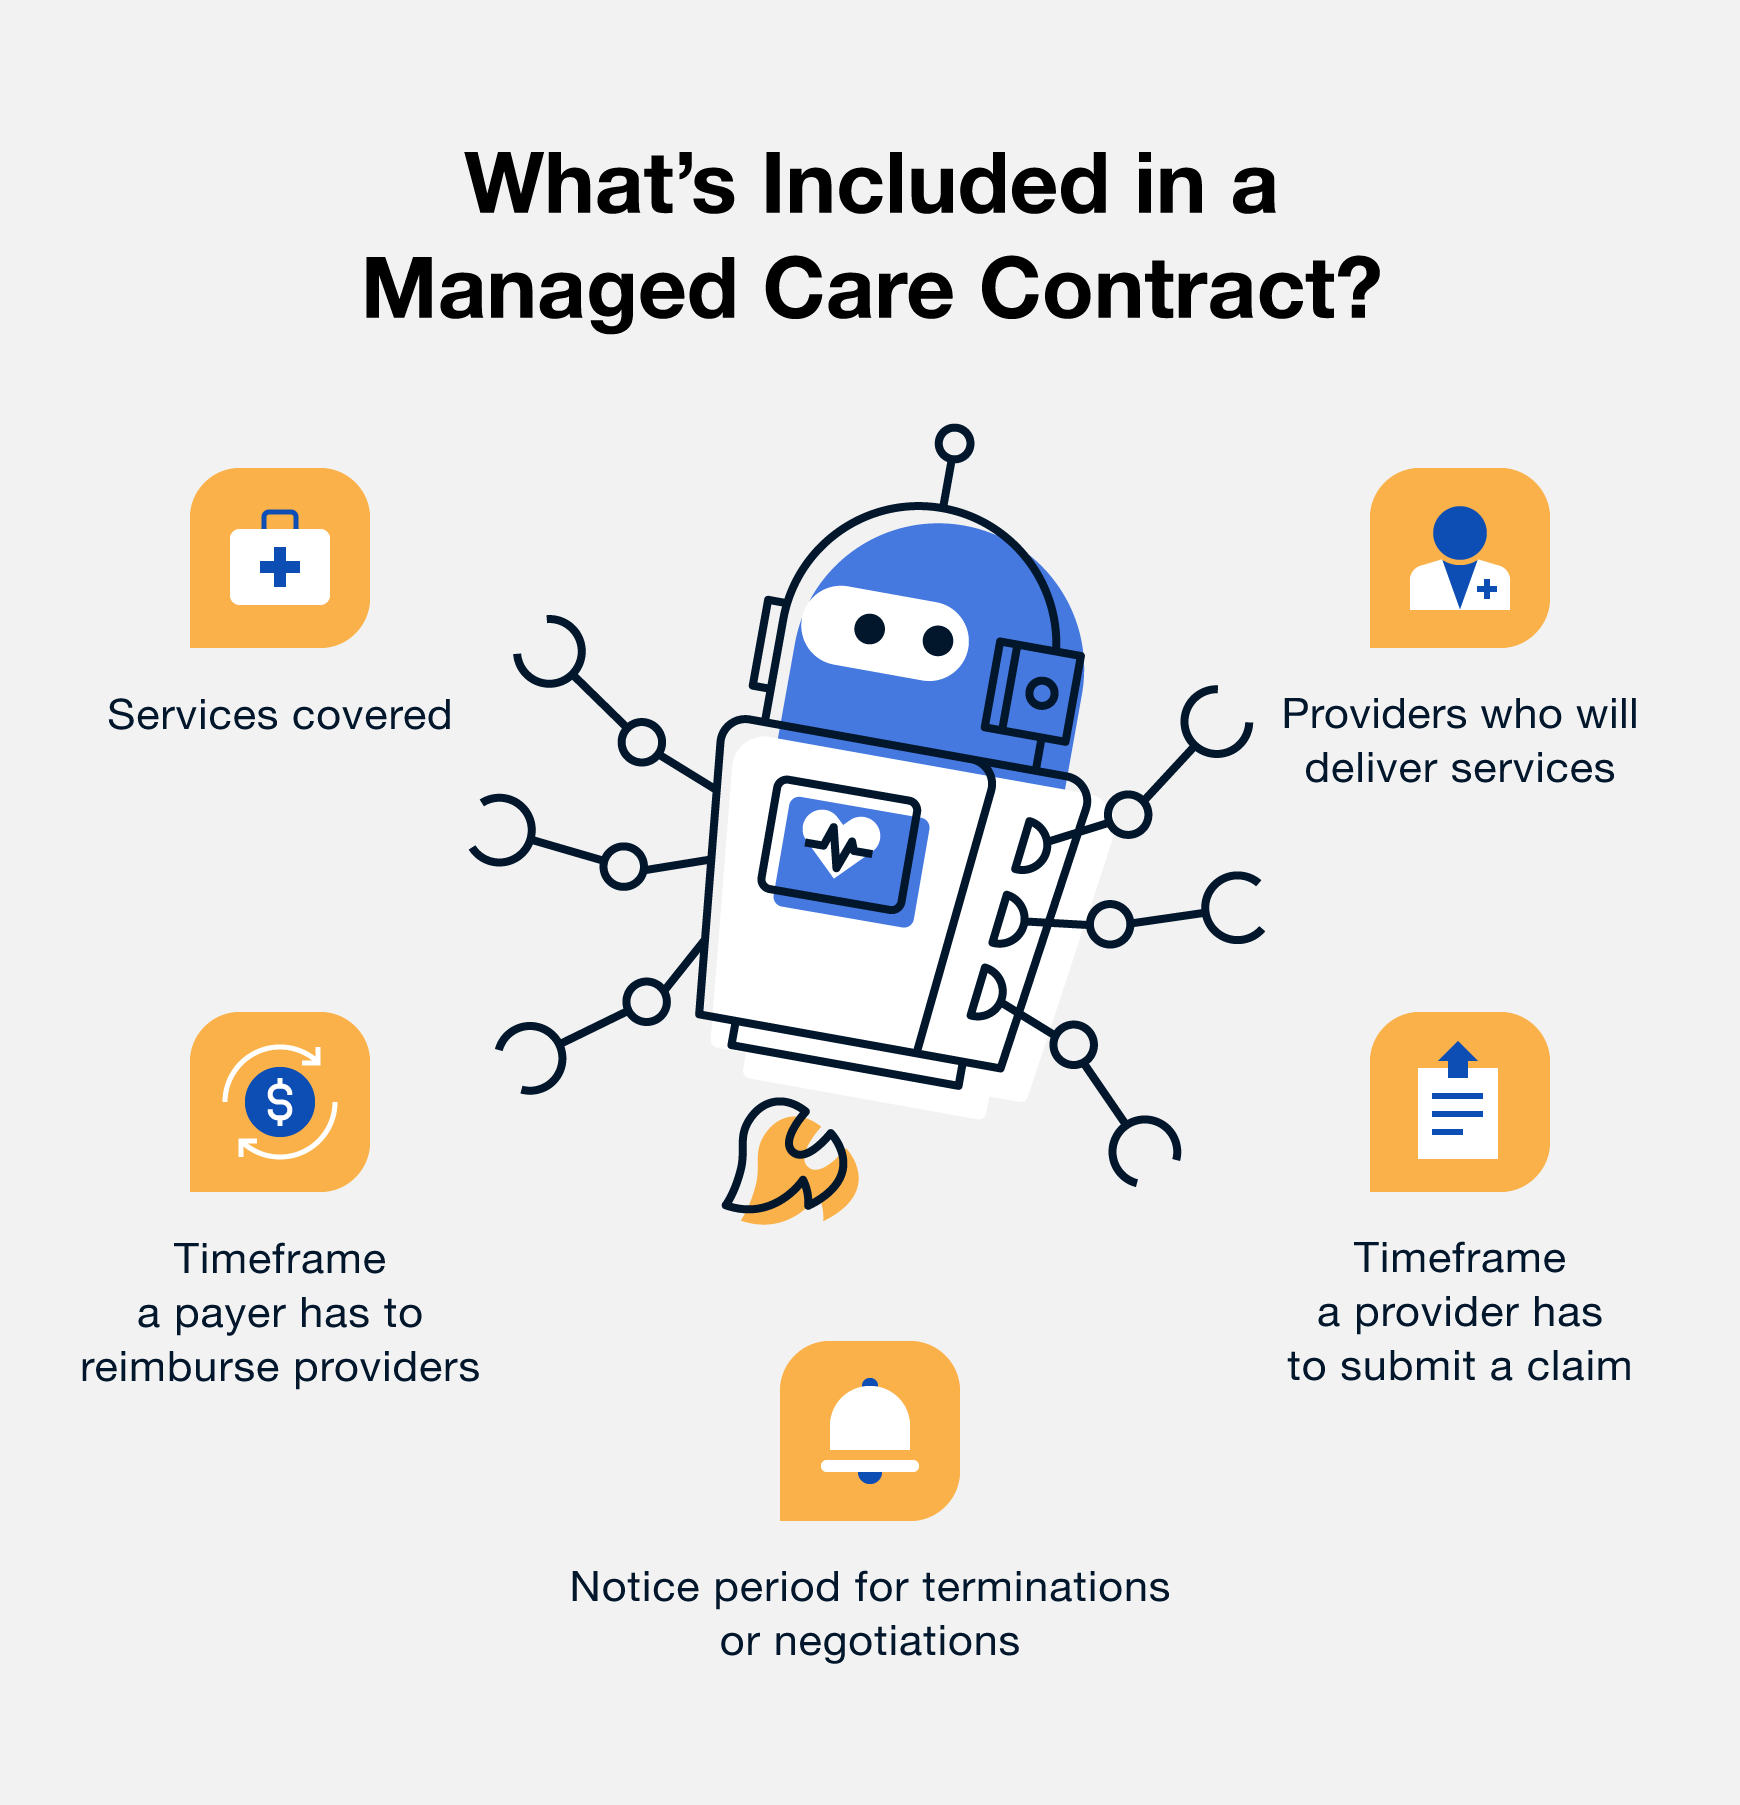 whats-included-in-a-managed-care-contract-1